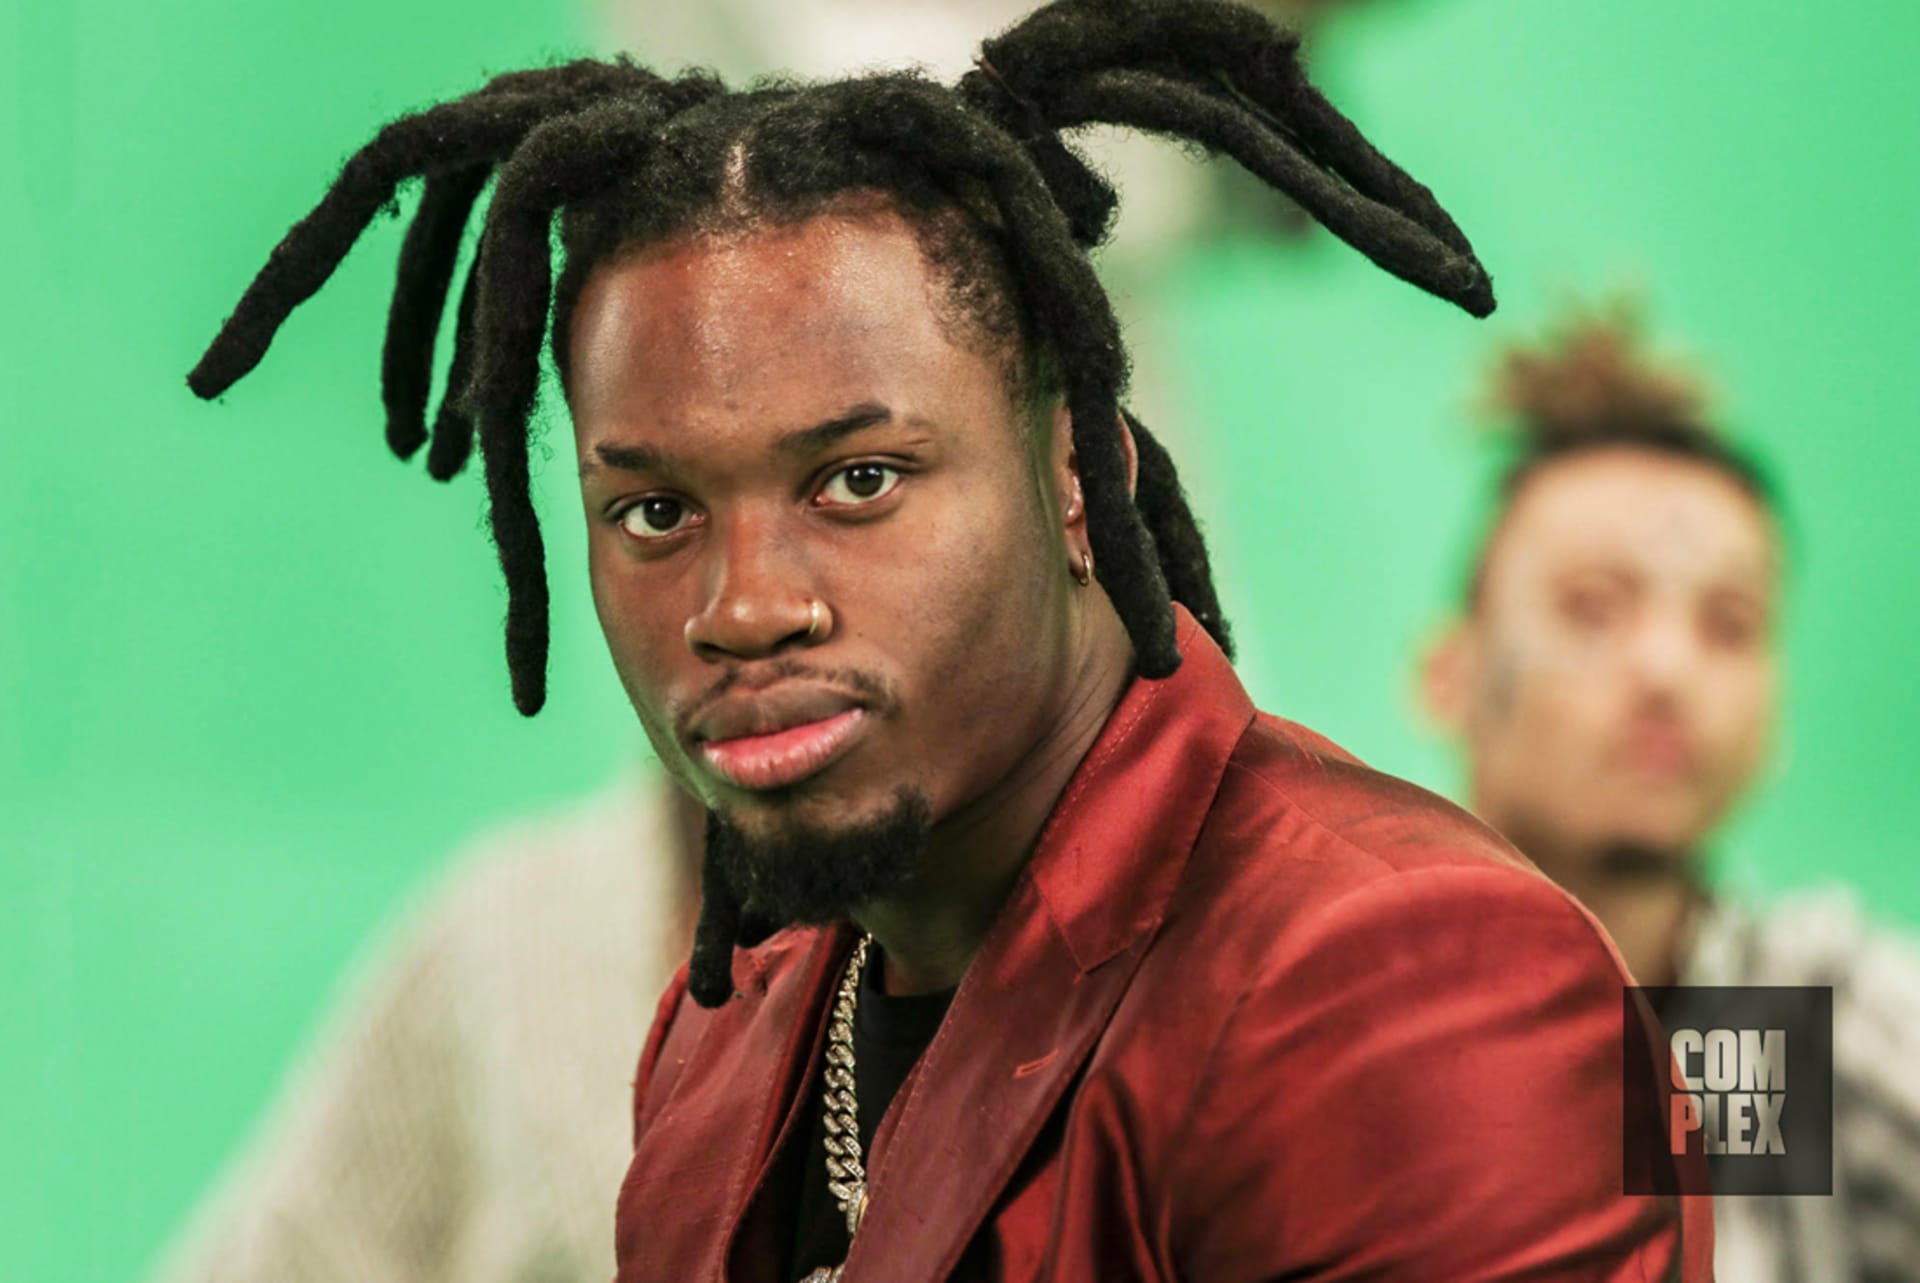 Denzel Curry at the "Black Balloons" music video shoot.